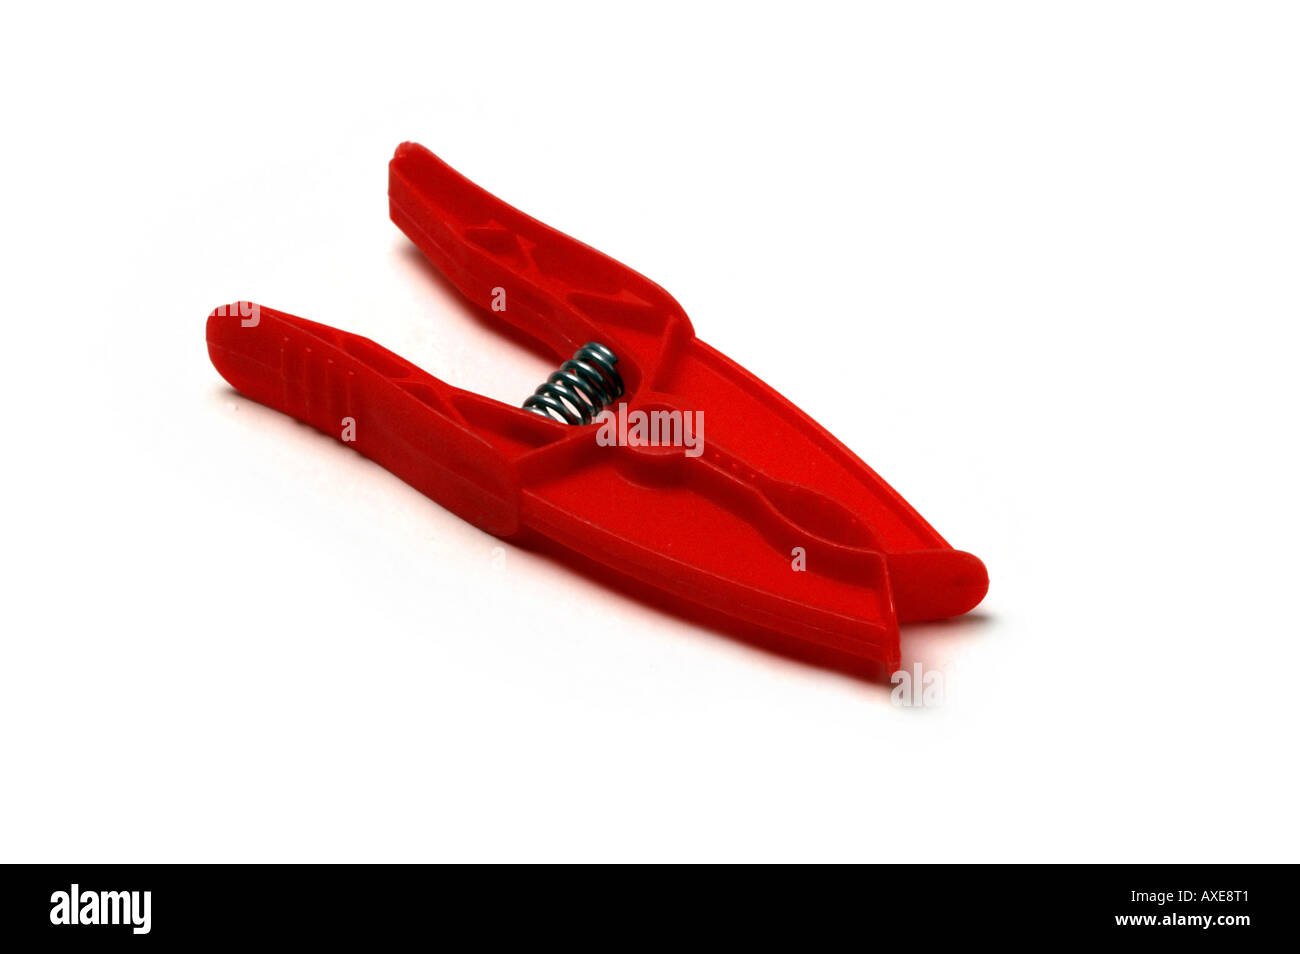 Red plastic clothes peg Stock Photo